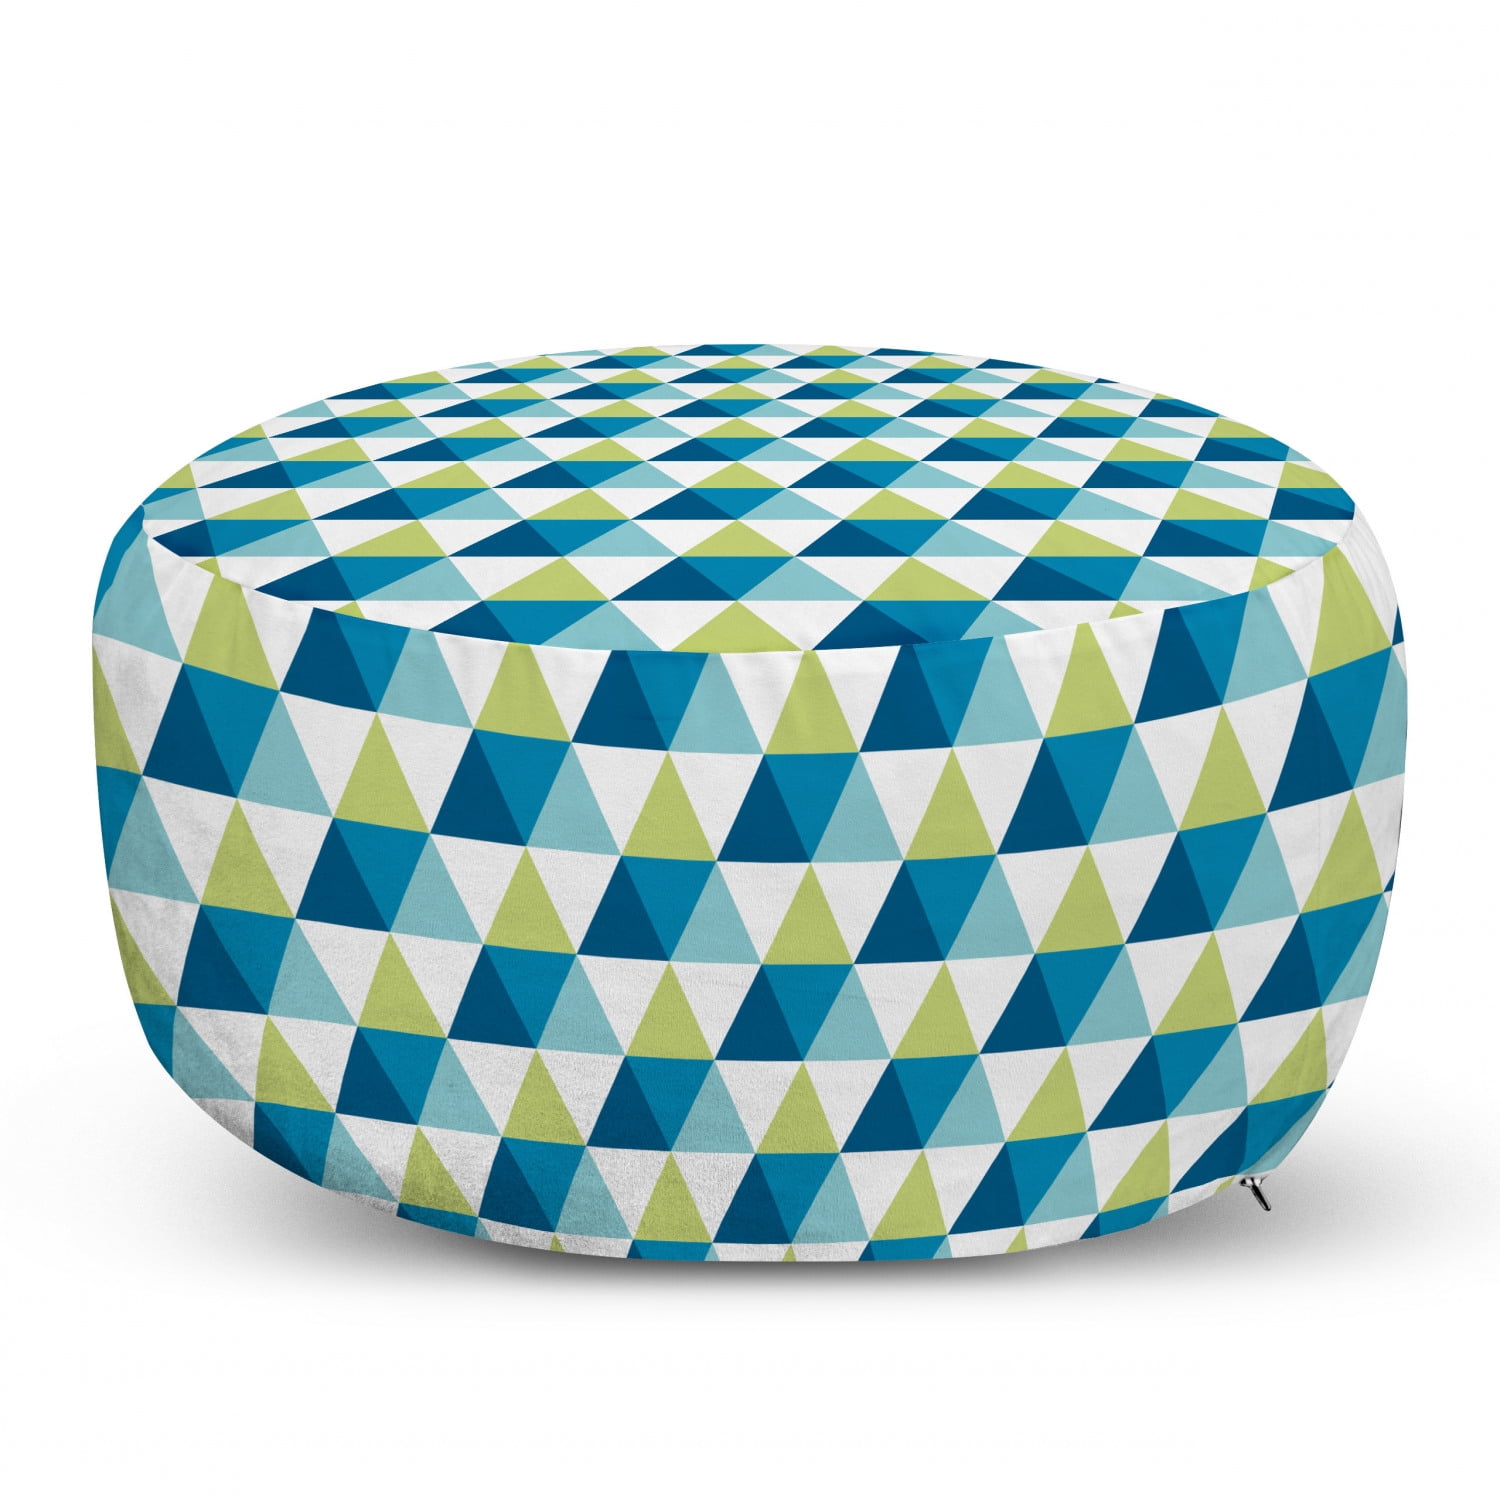 Decorative Soft Foot Rest with Removable Cover Living Room and Bedroom Ambesonne Abstract Ottoman Pouf Pale Green Blue Violet Modern Geometric Shapes Forming Circles Optical Illusion Pattern